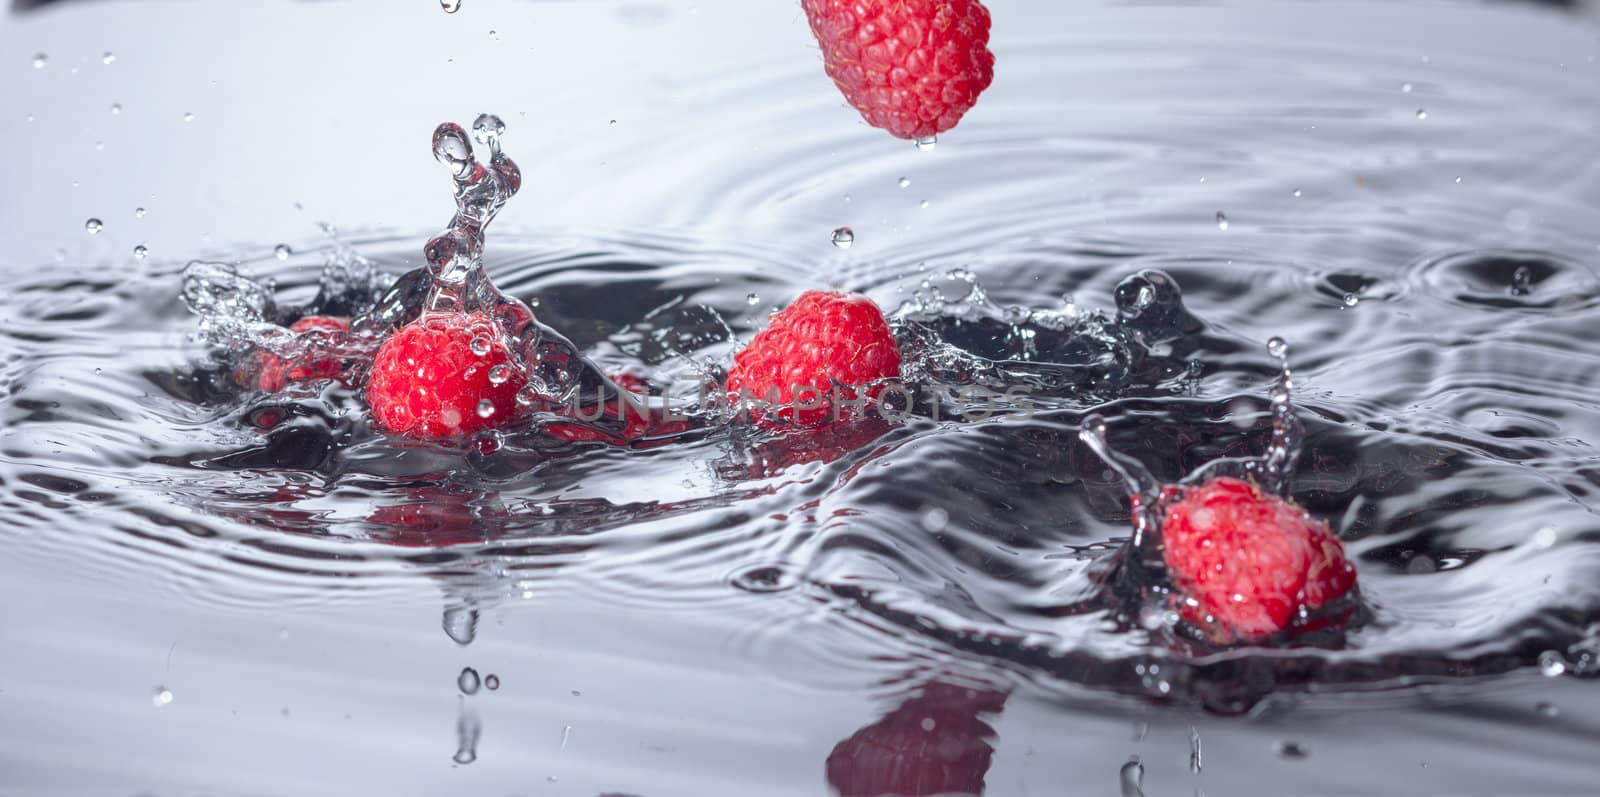 Red Raspberries Dropped into Water with Splash by Discovod